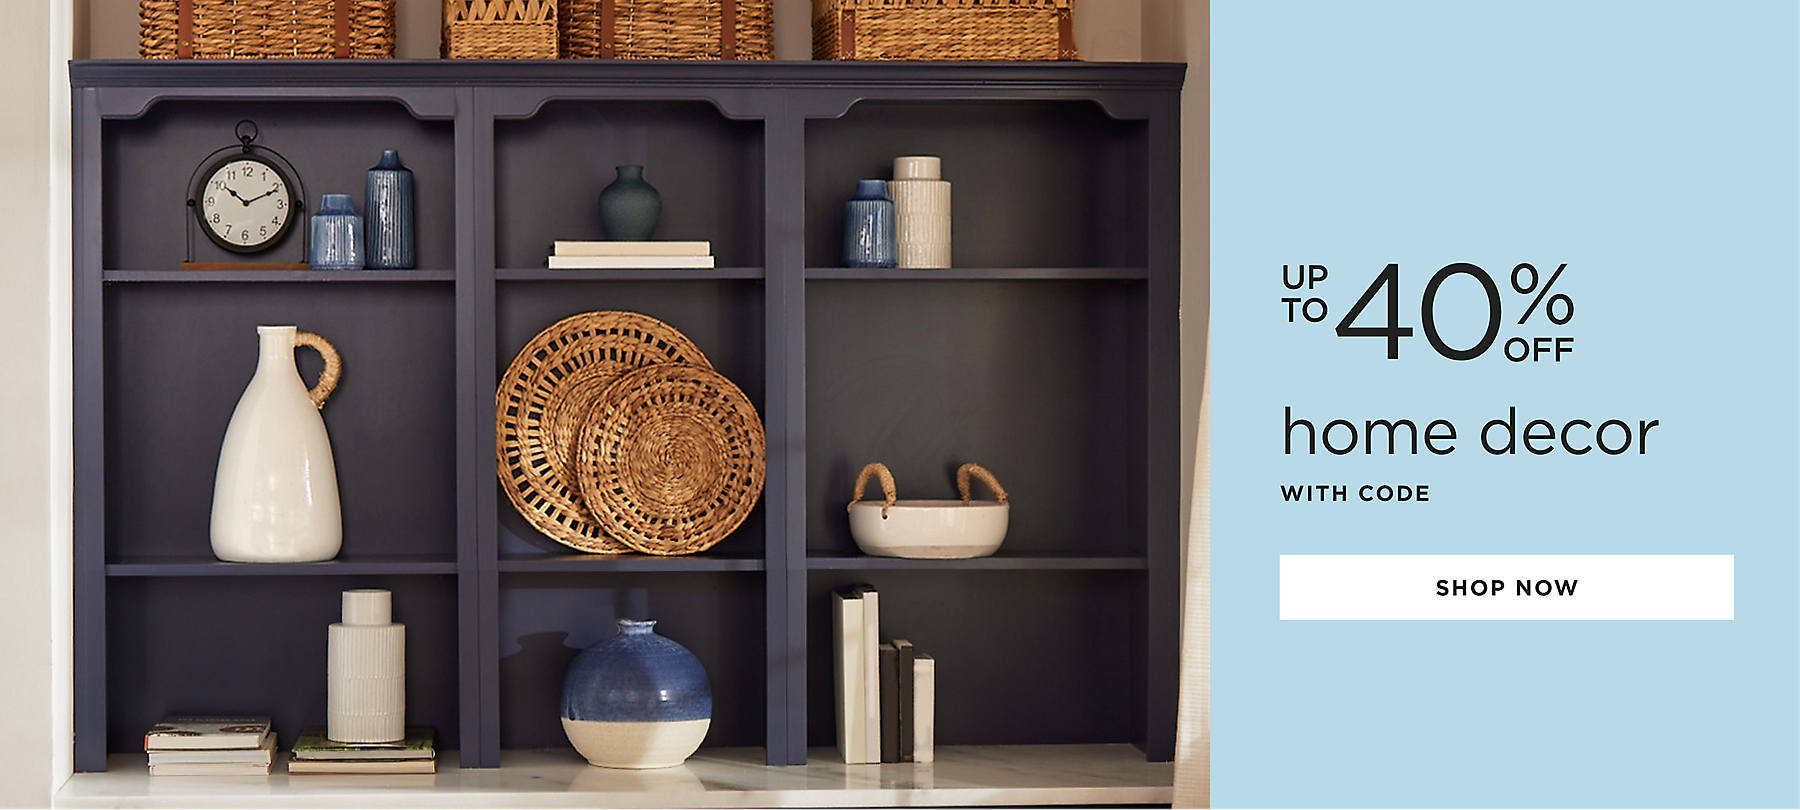 home decor up to 40% off with code shop now